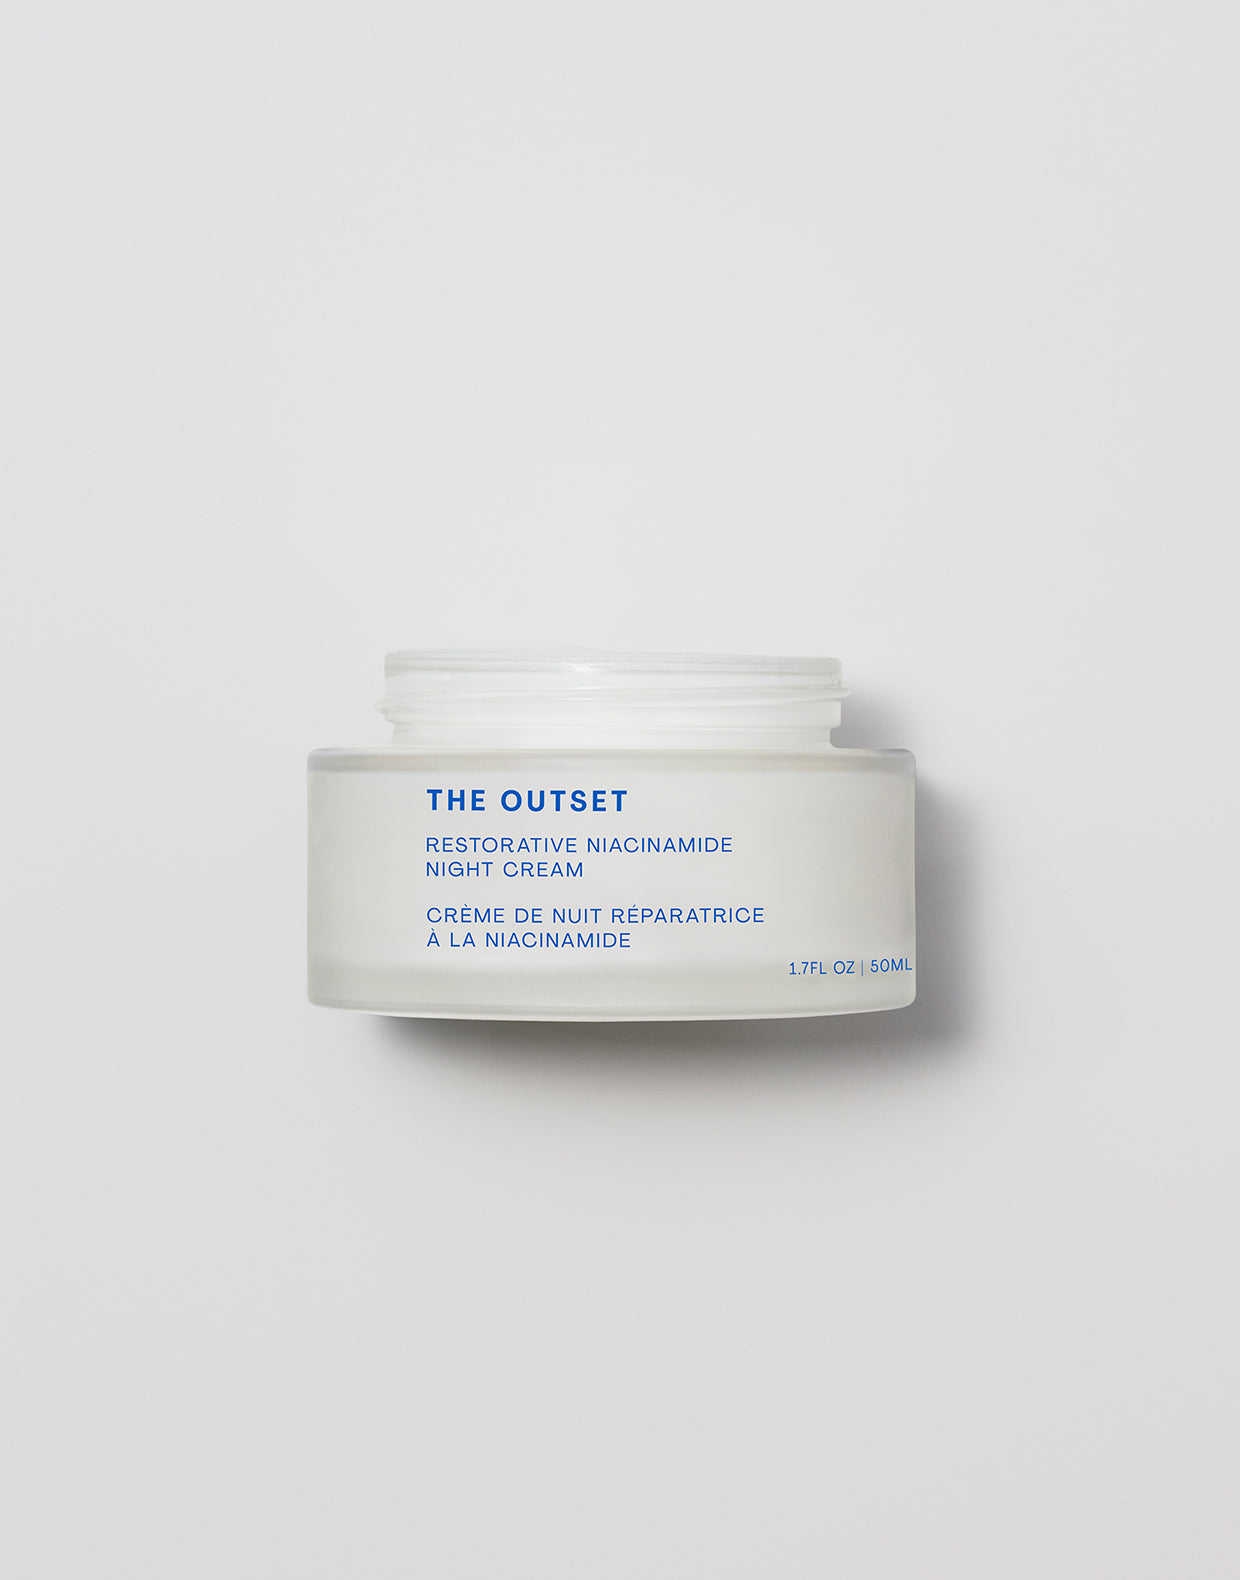 Front view photo of The Outset's Restorative Niacinamide Night Cream without lid